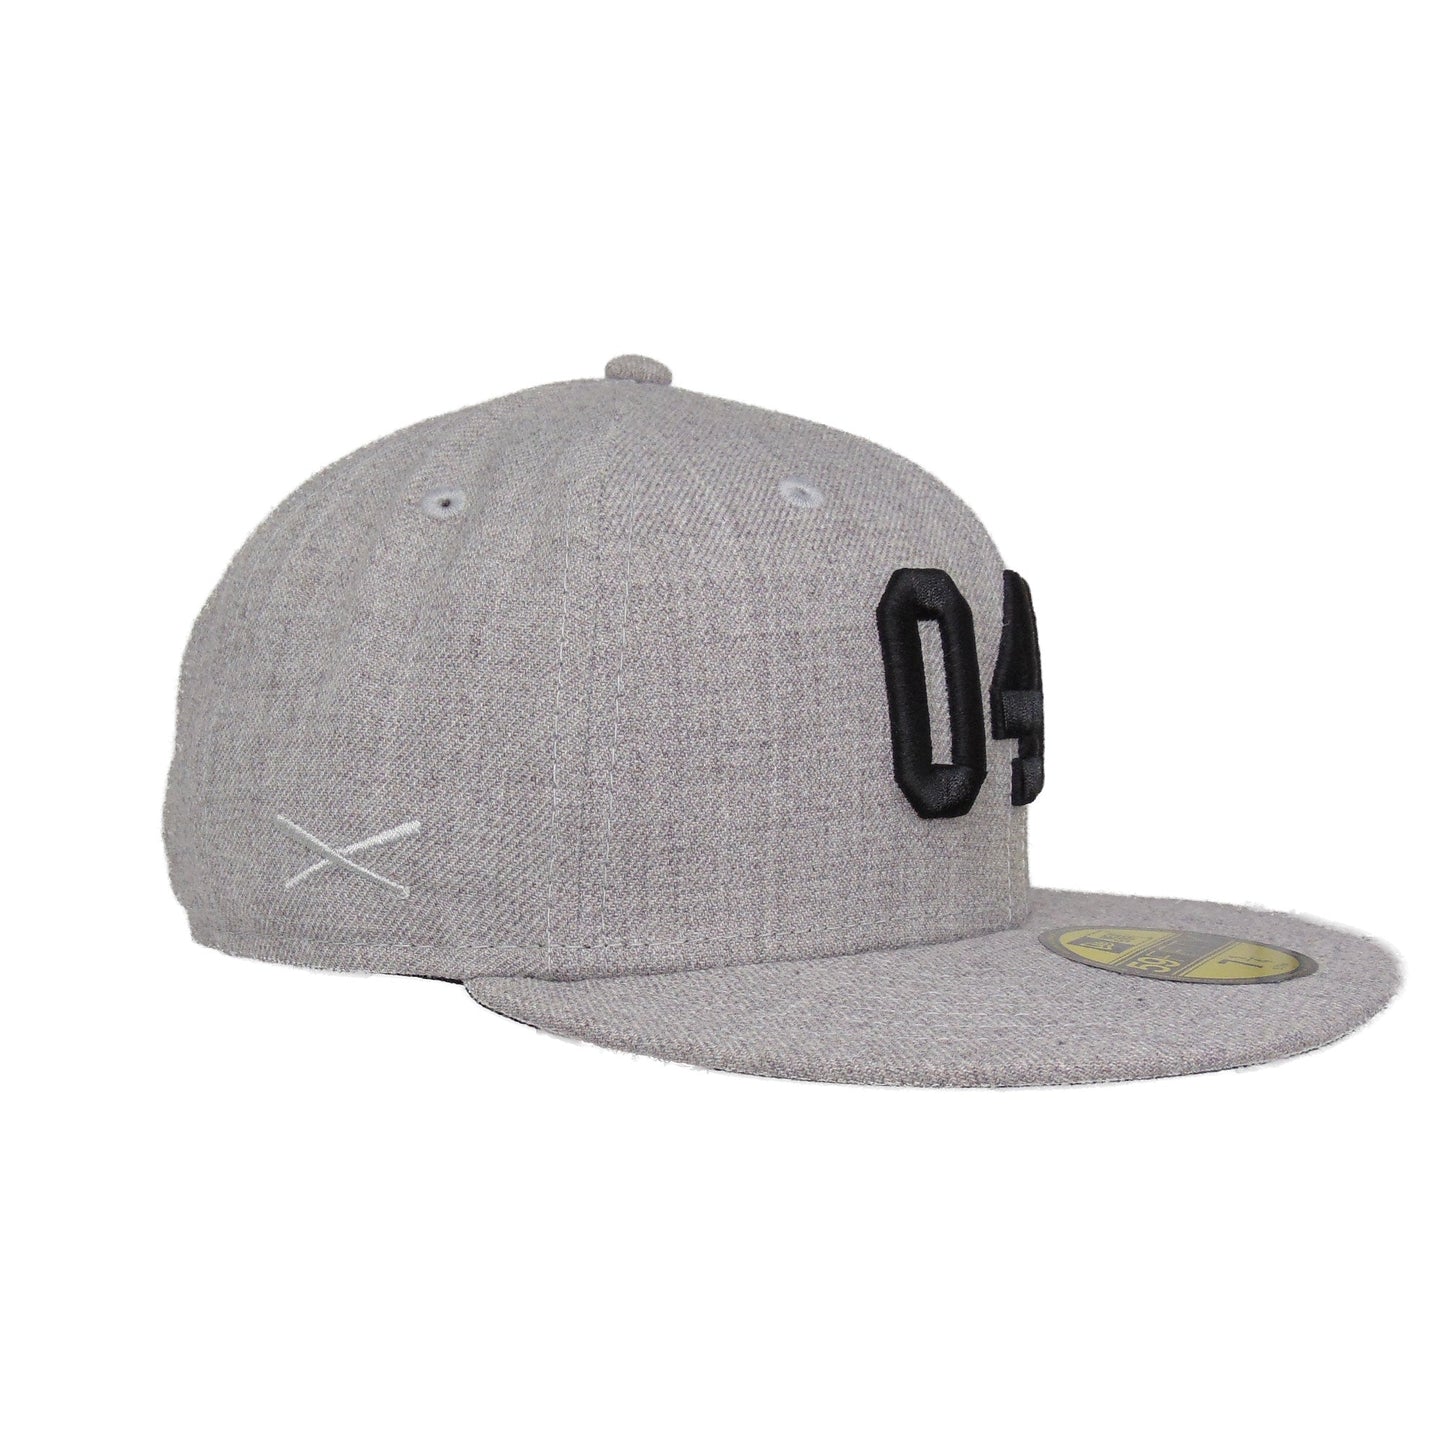 JustFitteds 040 New Era 59FIFTY Cap Heather Grey